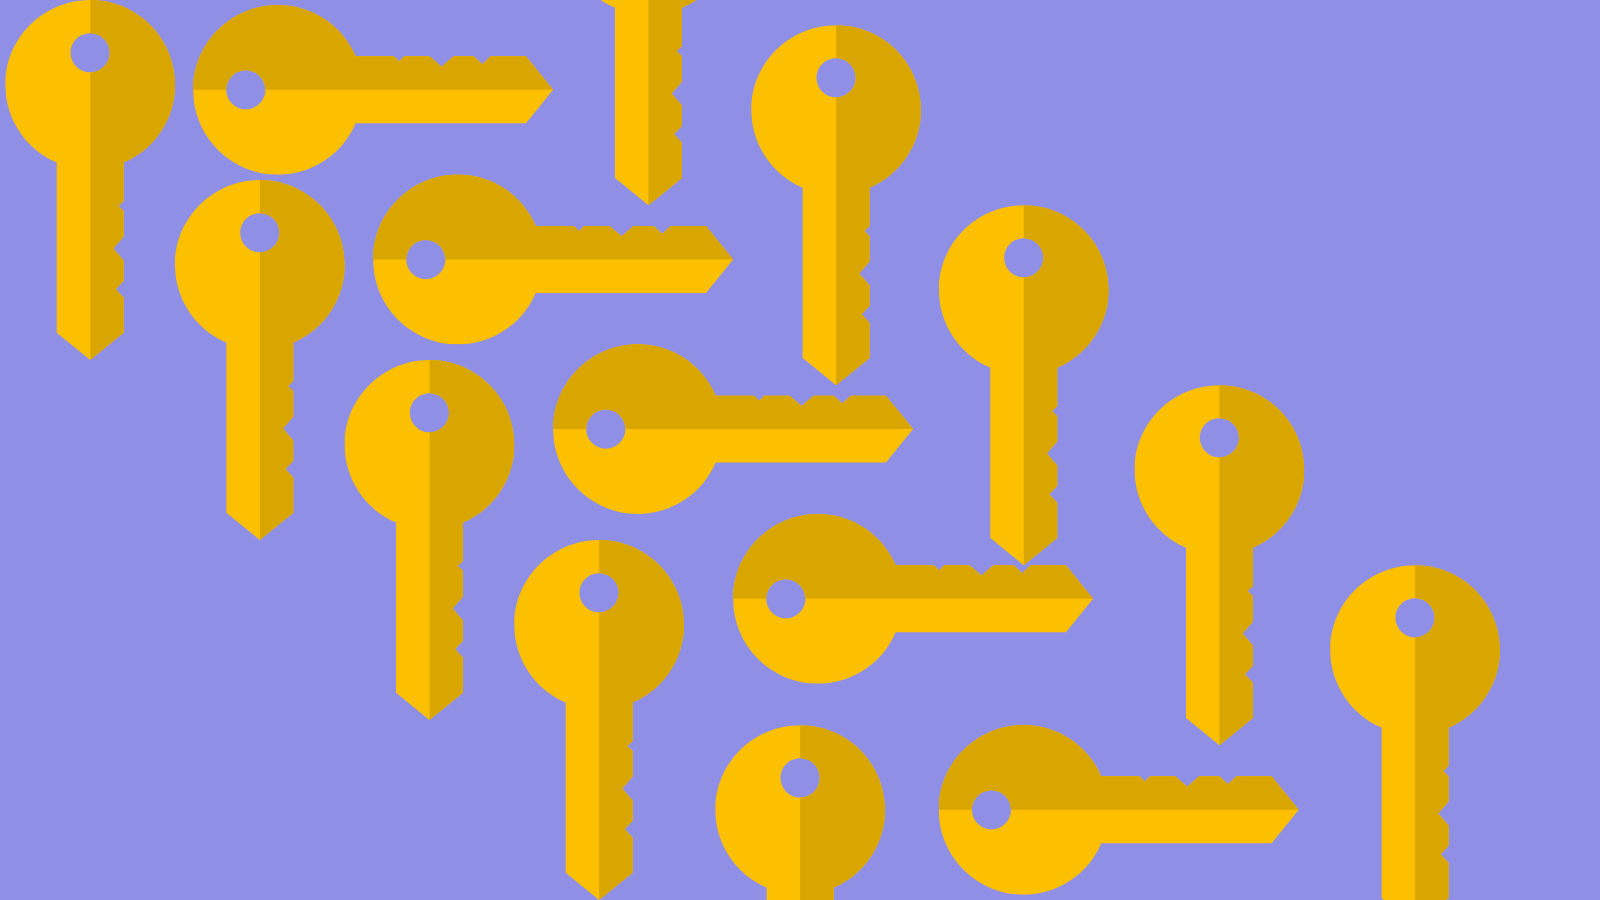 A repeating pattern of keys (1)